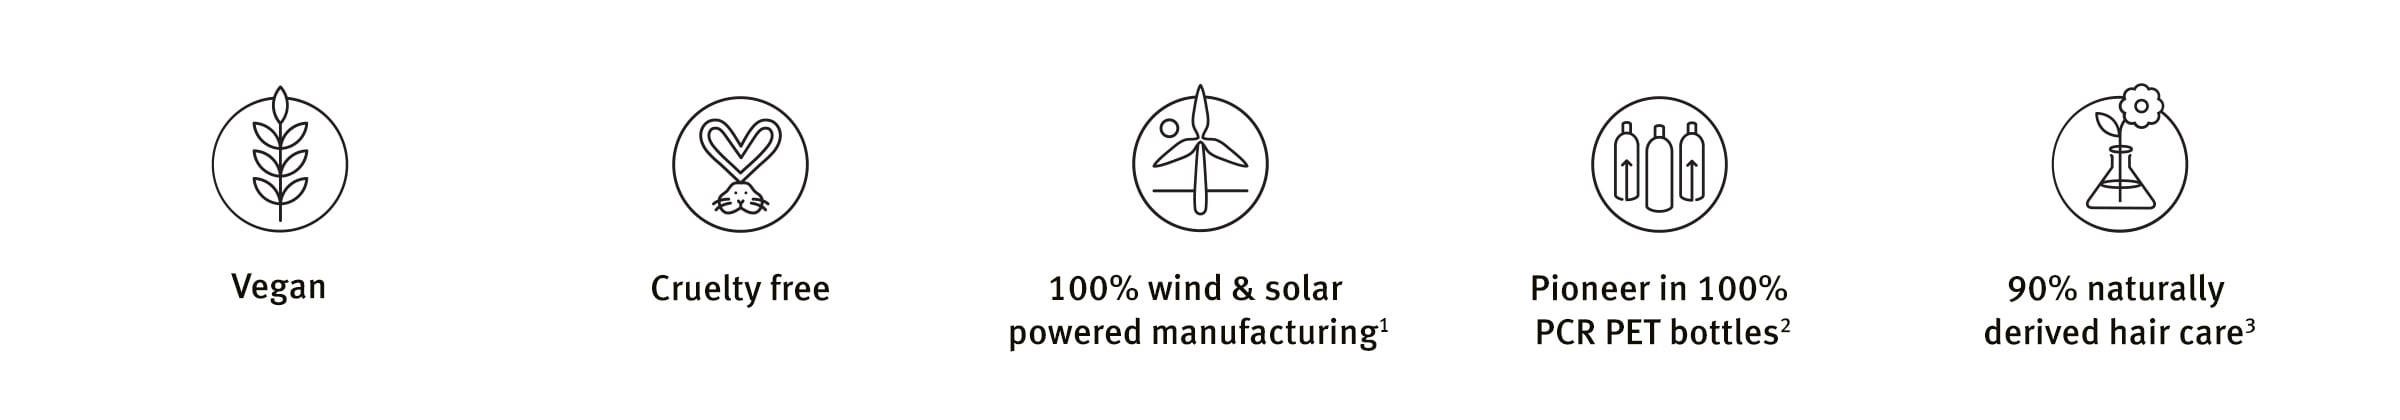 Aveda is 100% vegan, cruelty-free, wind & solar powered manufacturing, pioneer in 100% PCR bottles & 90% naturally derived hair 